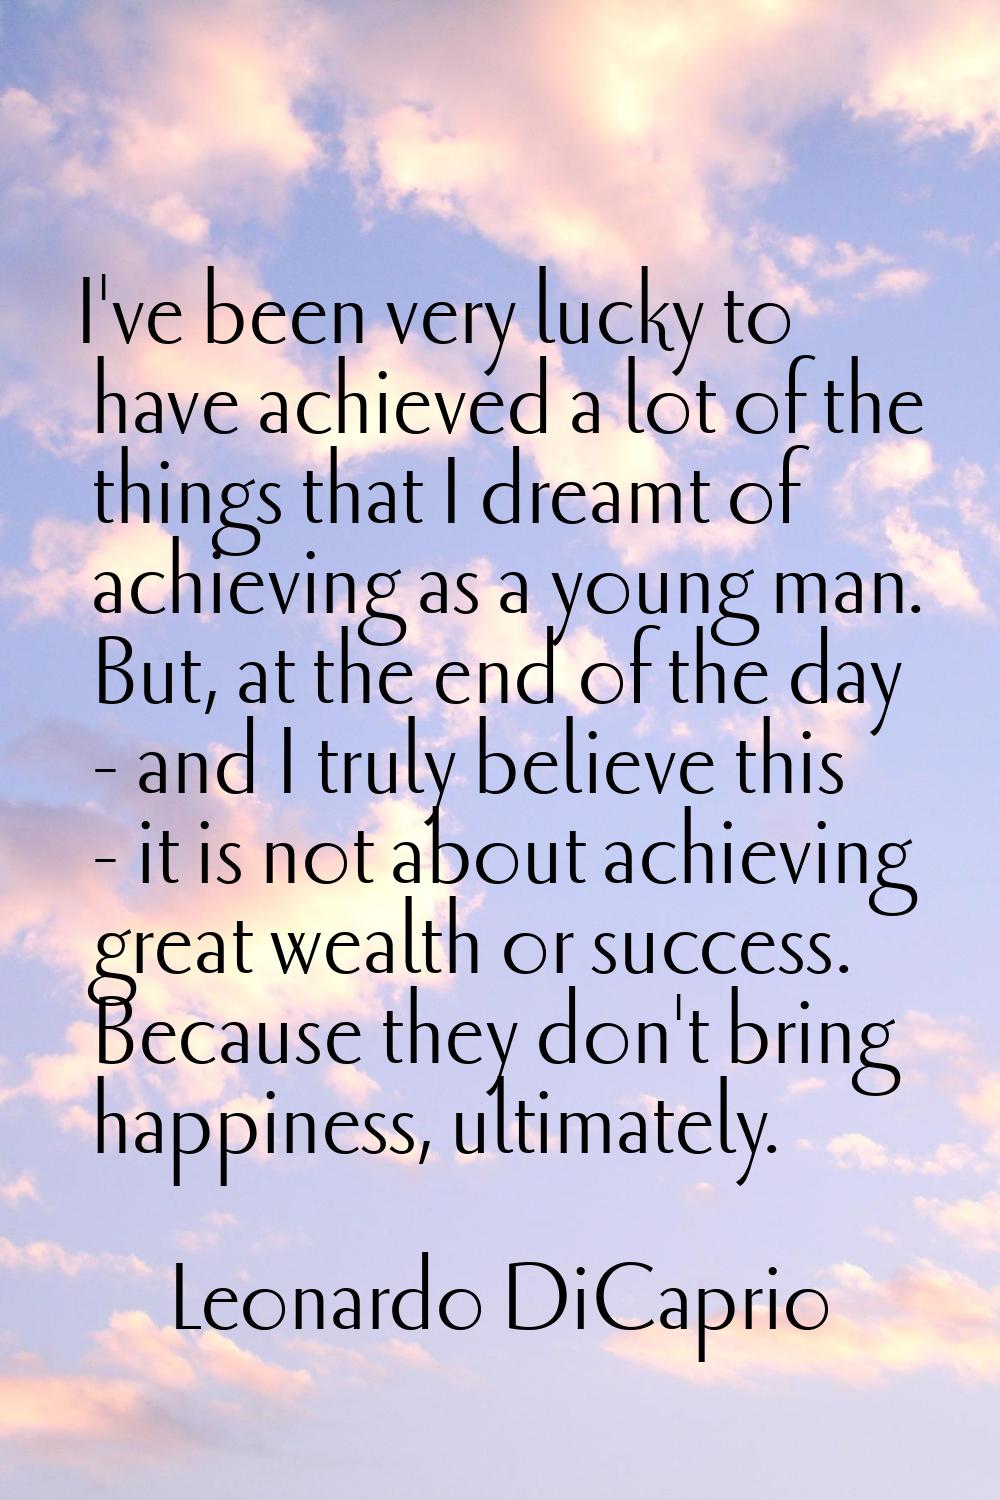 I've been very lucky to have achieved a lot of the things that I dreamt of achieving as a young man